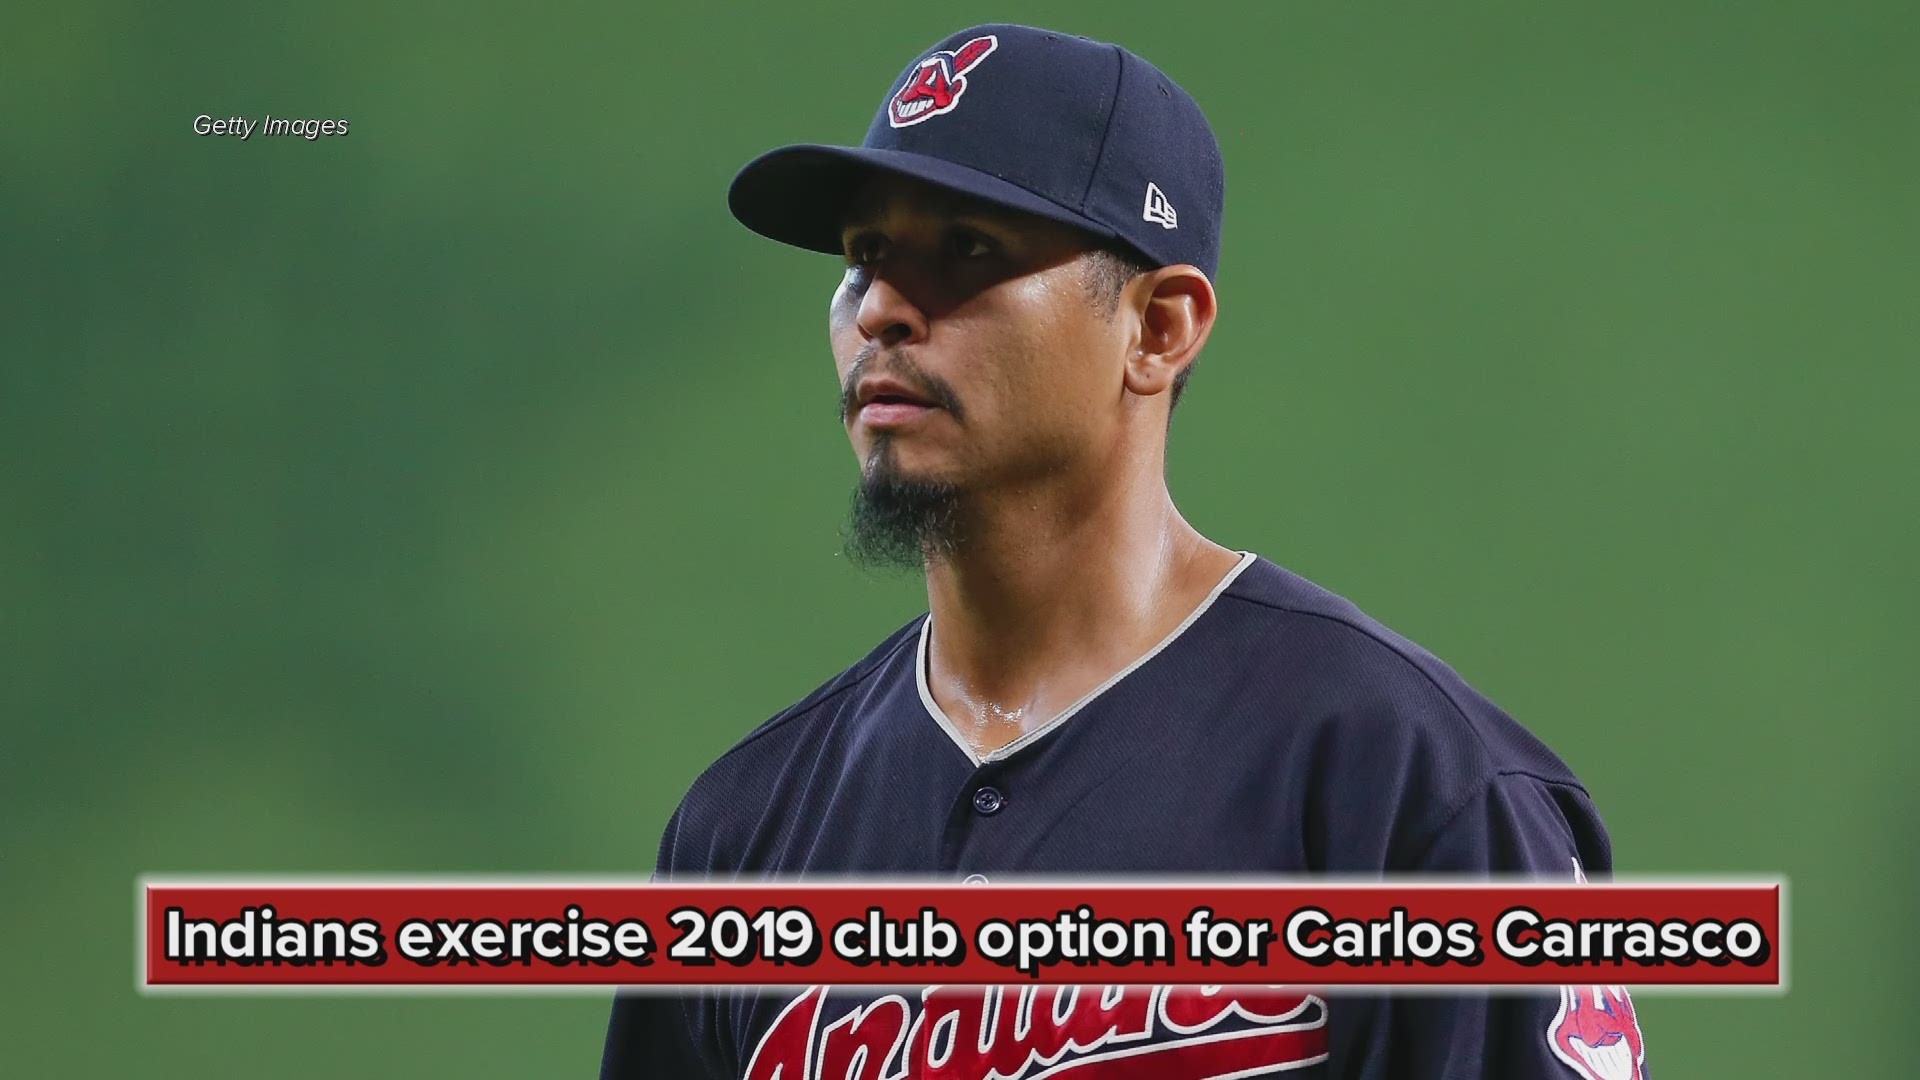 Cleveland Indians exercise 2019 club option for Carlos Carrasco, decline option for Brandon Guyer